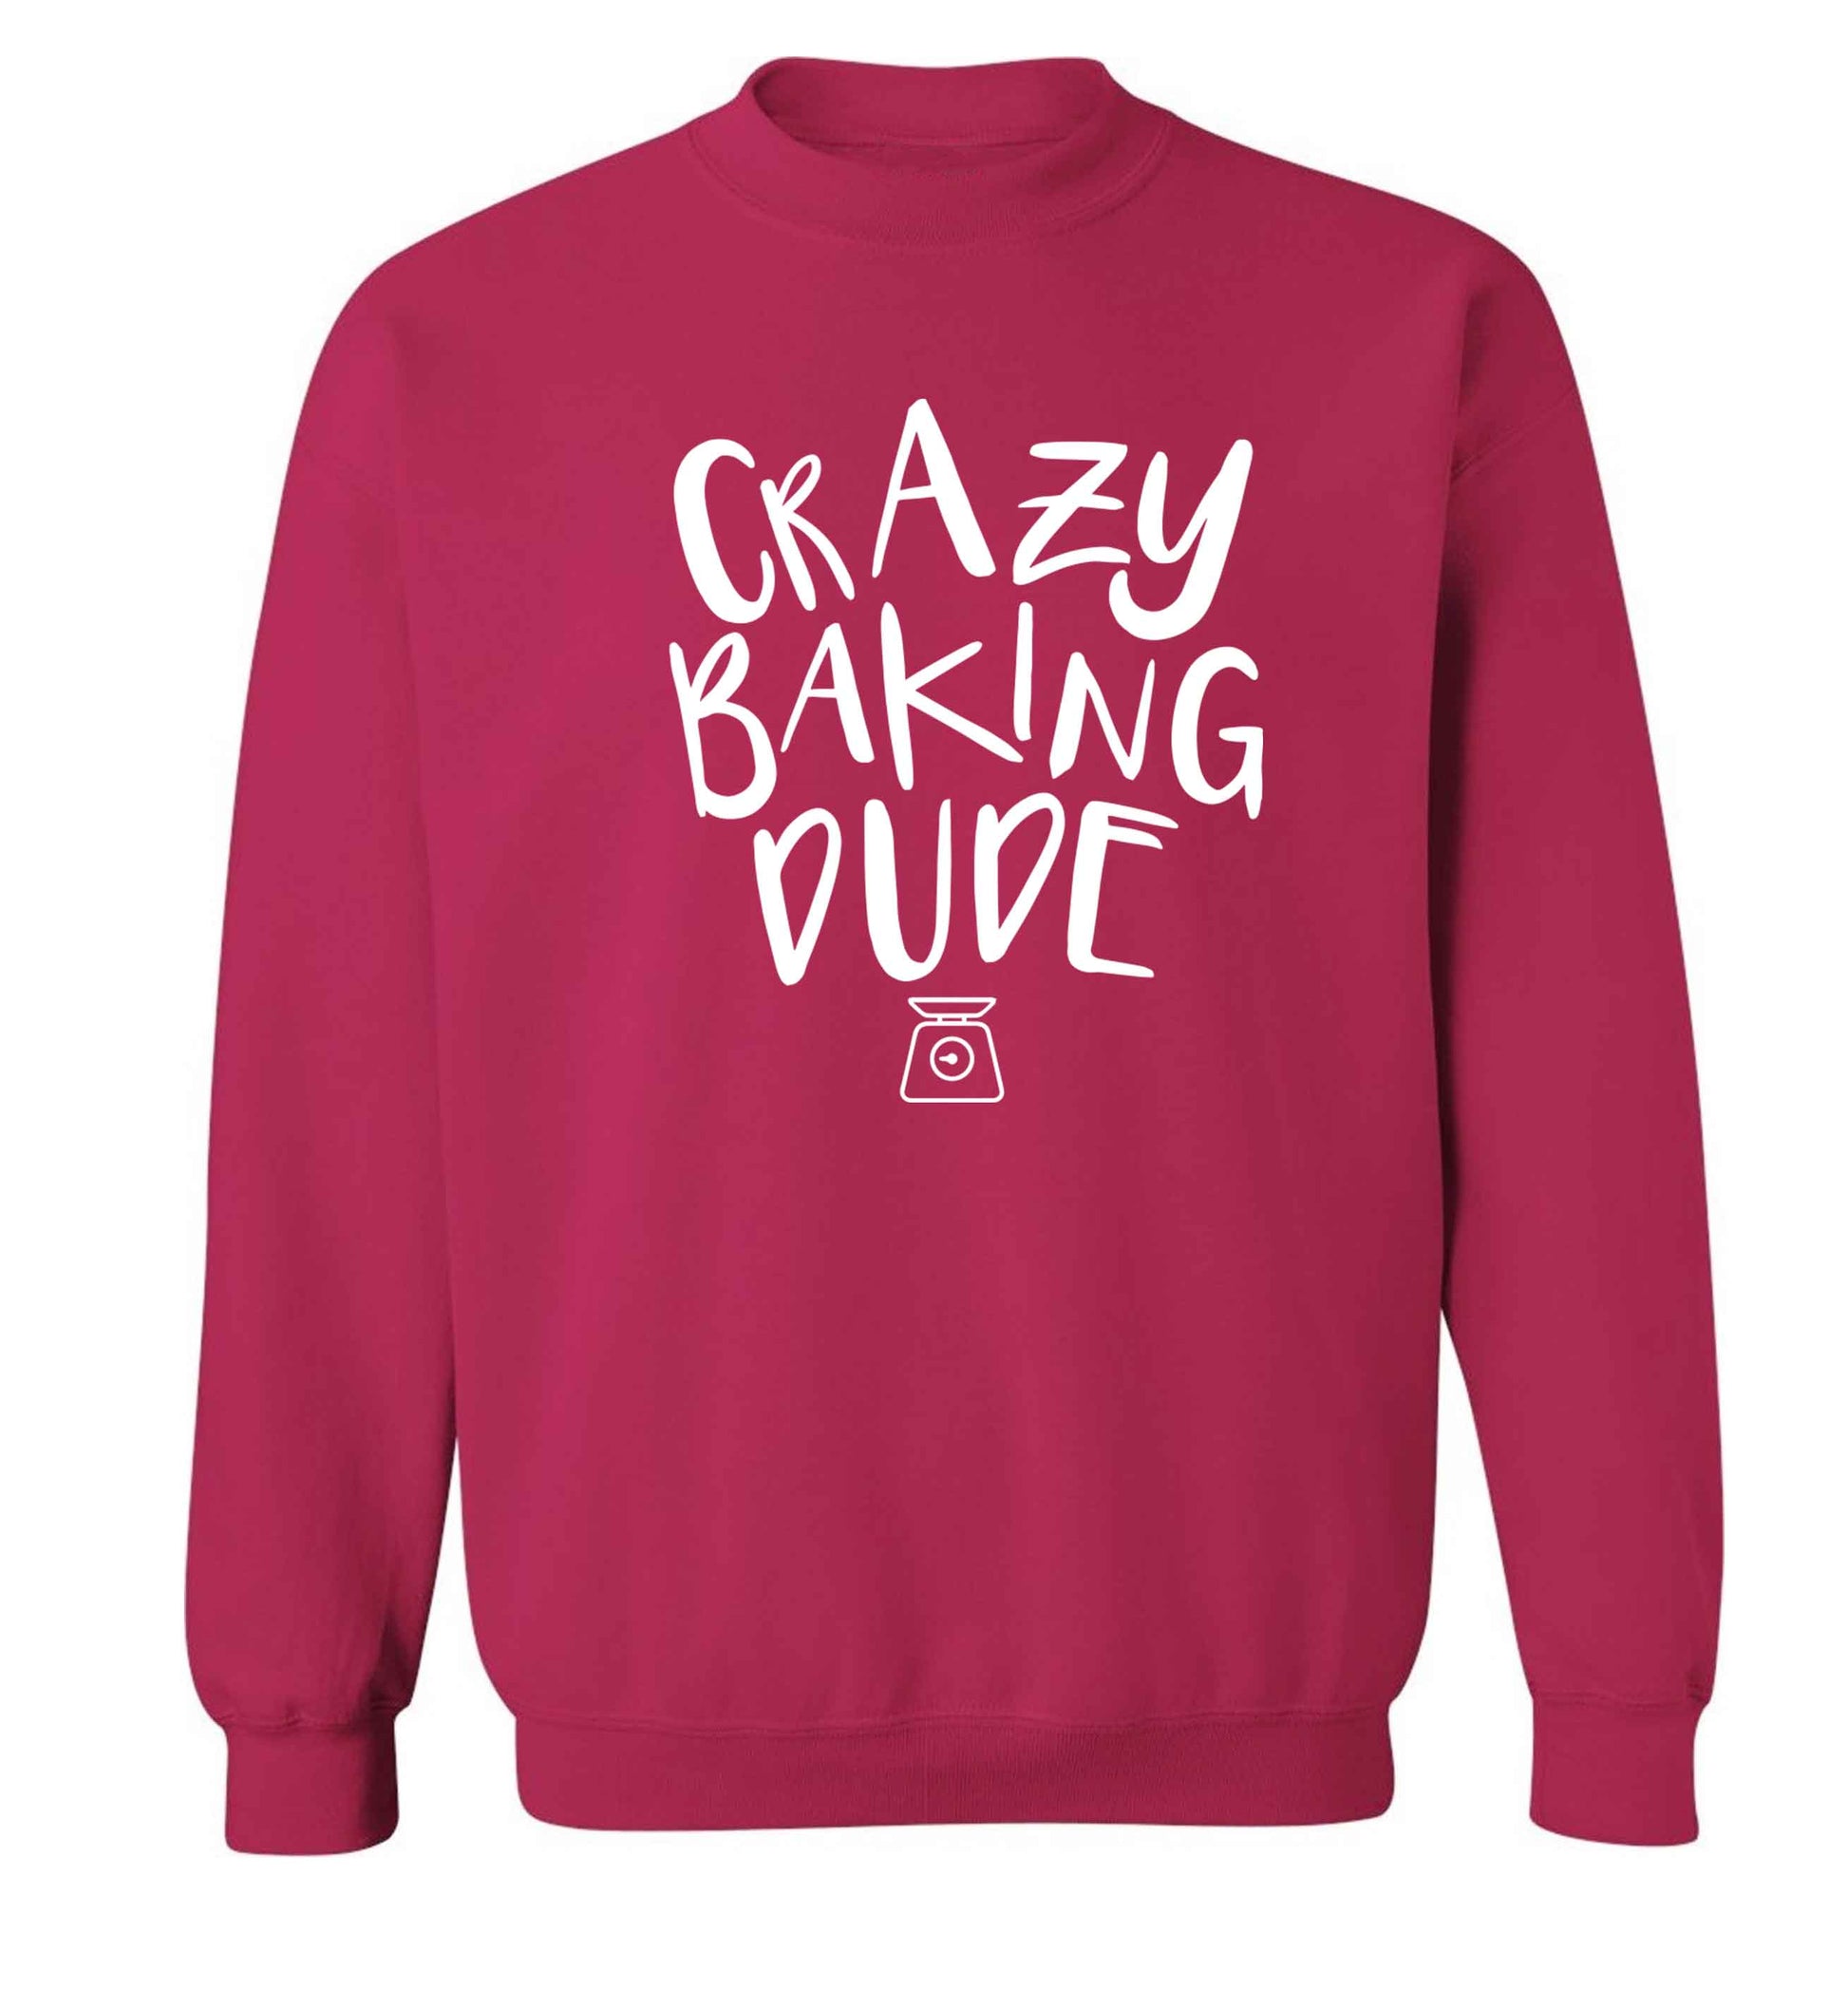 Crazy baking dude Adult's unisex pink Sweater 2XL